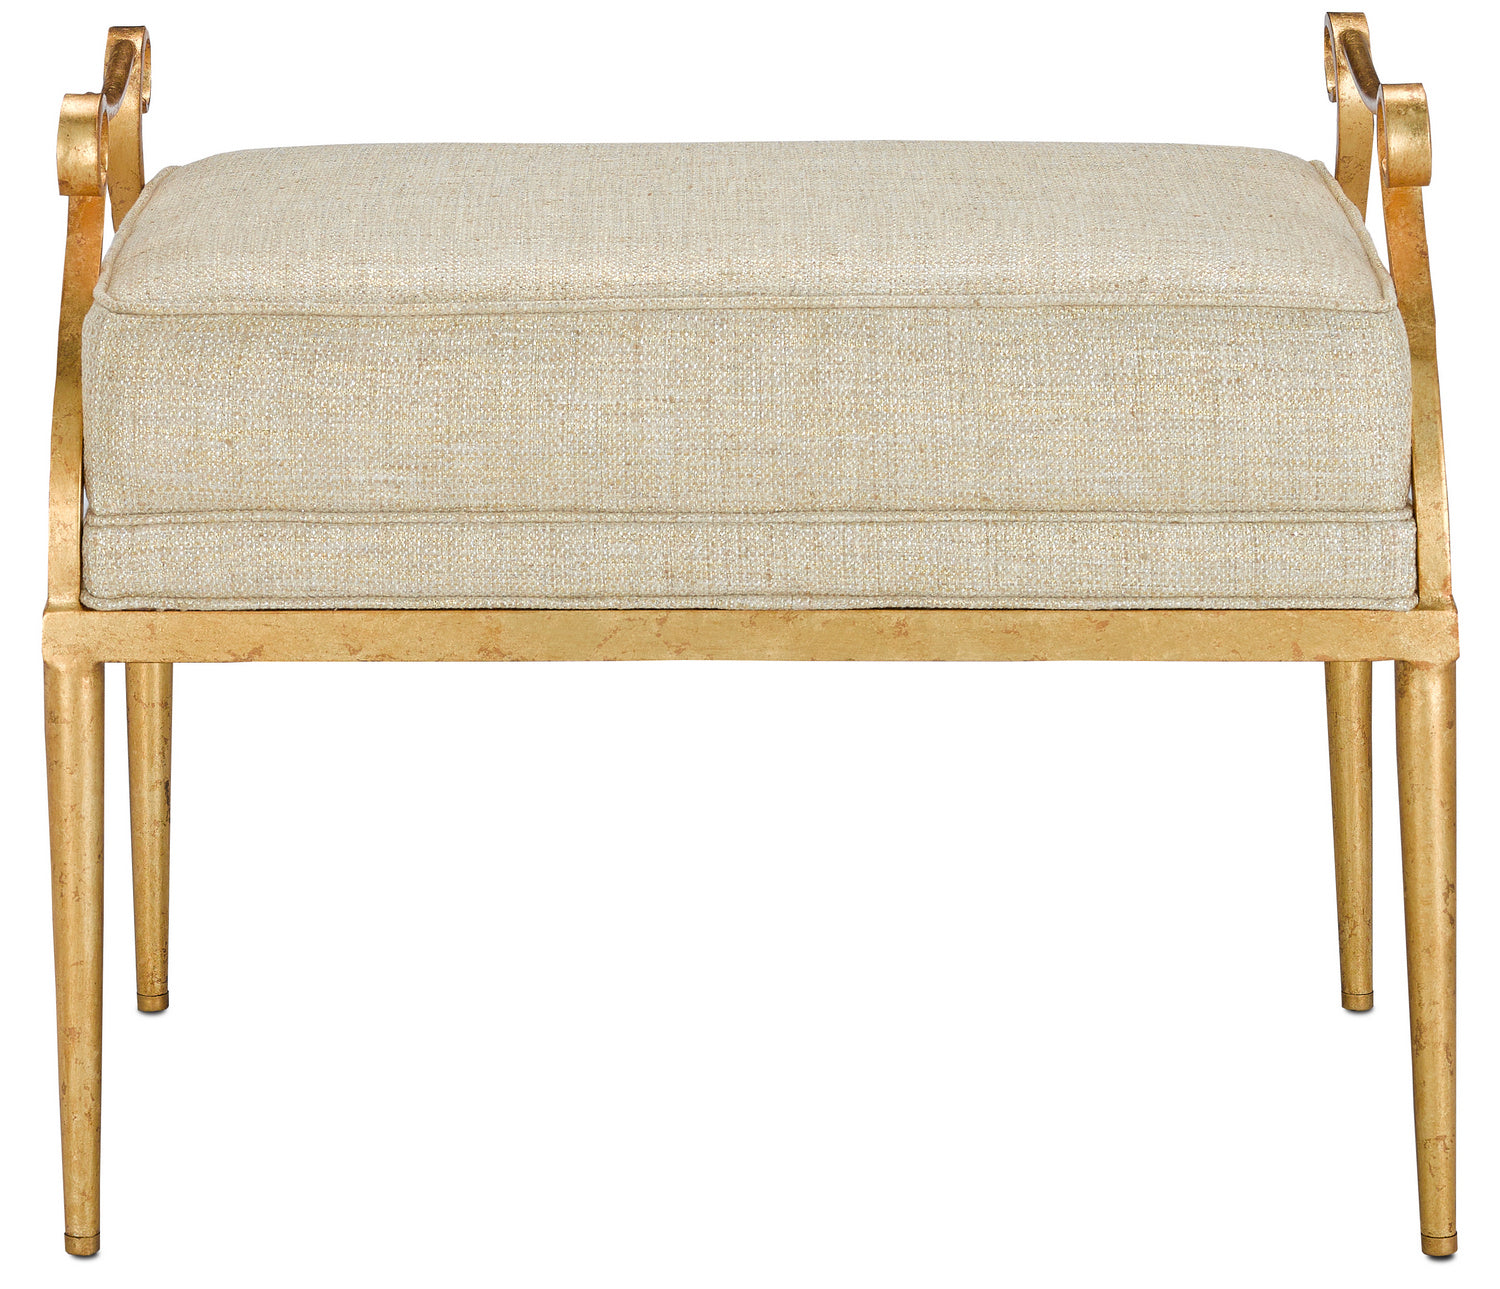 Ottoman from the Genevieve collection in Grecian Gold finish